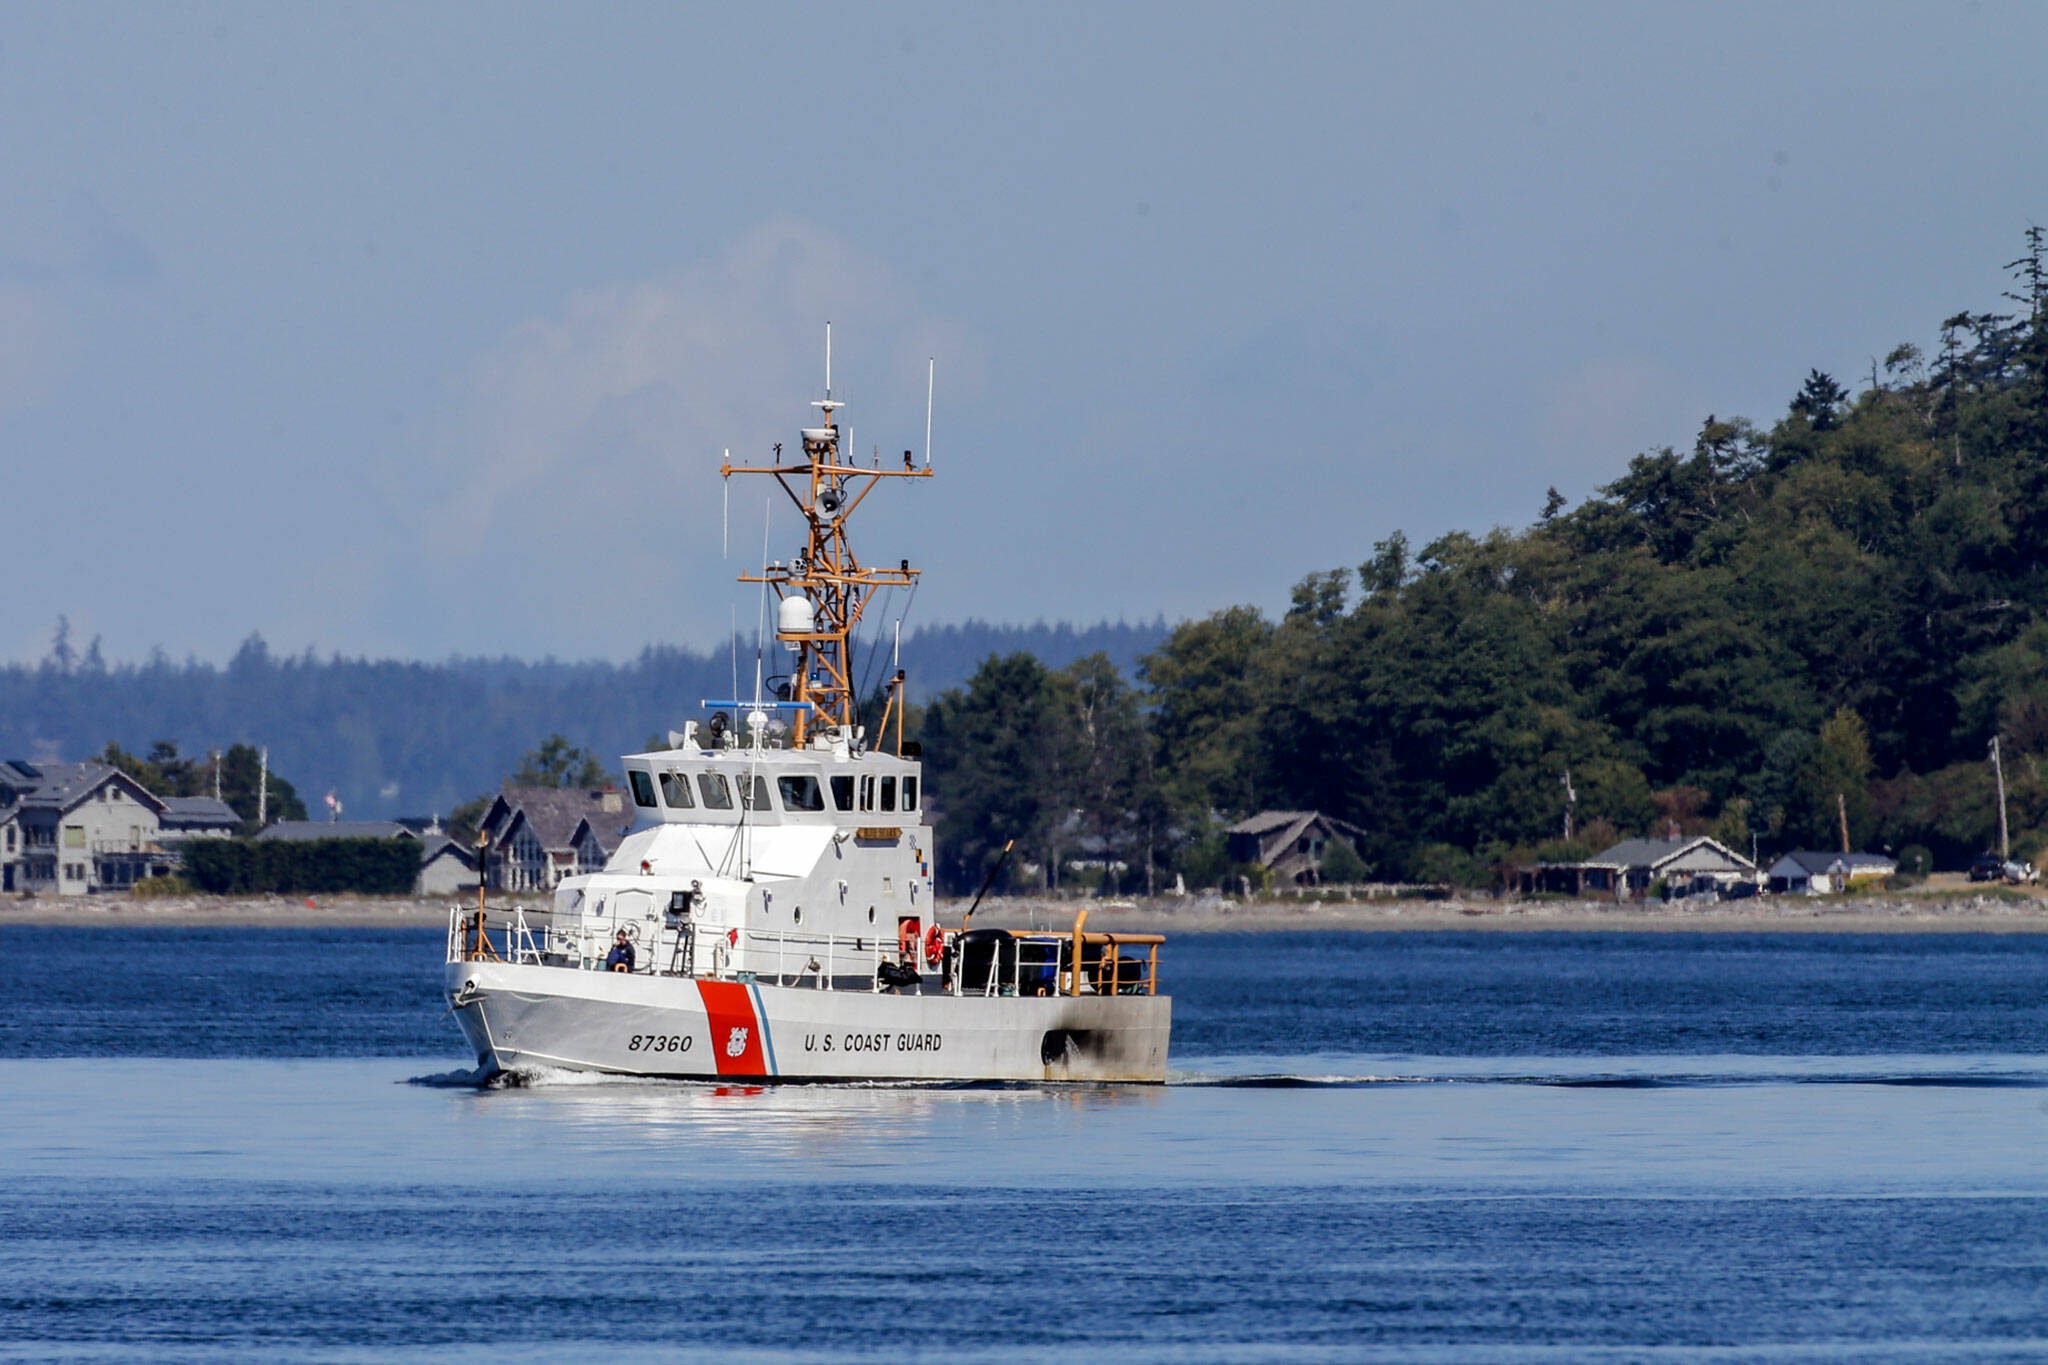 A Coast Guard cutter searches for a crashed chartered floatplane near Mutiny Bay Monday afternoon in Freeland, Washington on August 5, 2022. (Kevin Clark / The Herald)